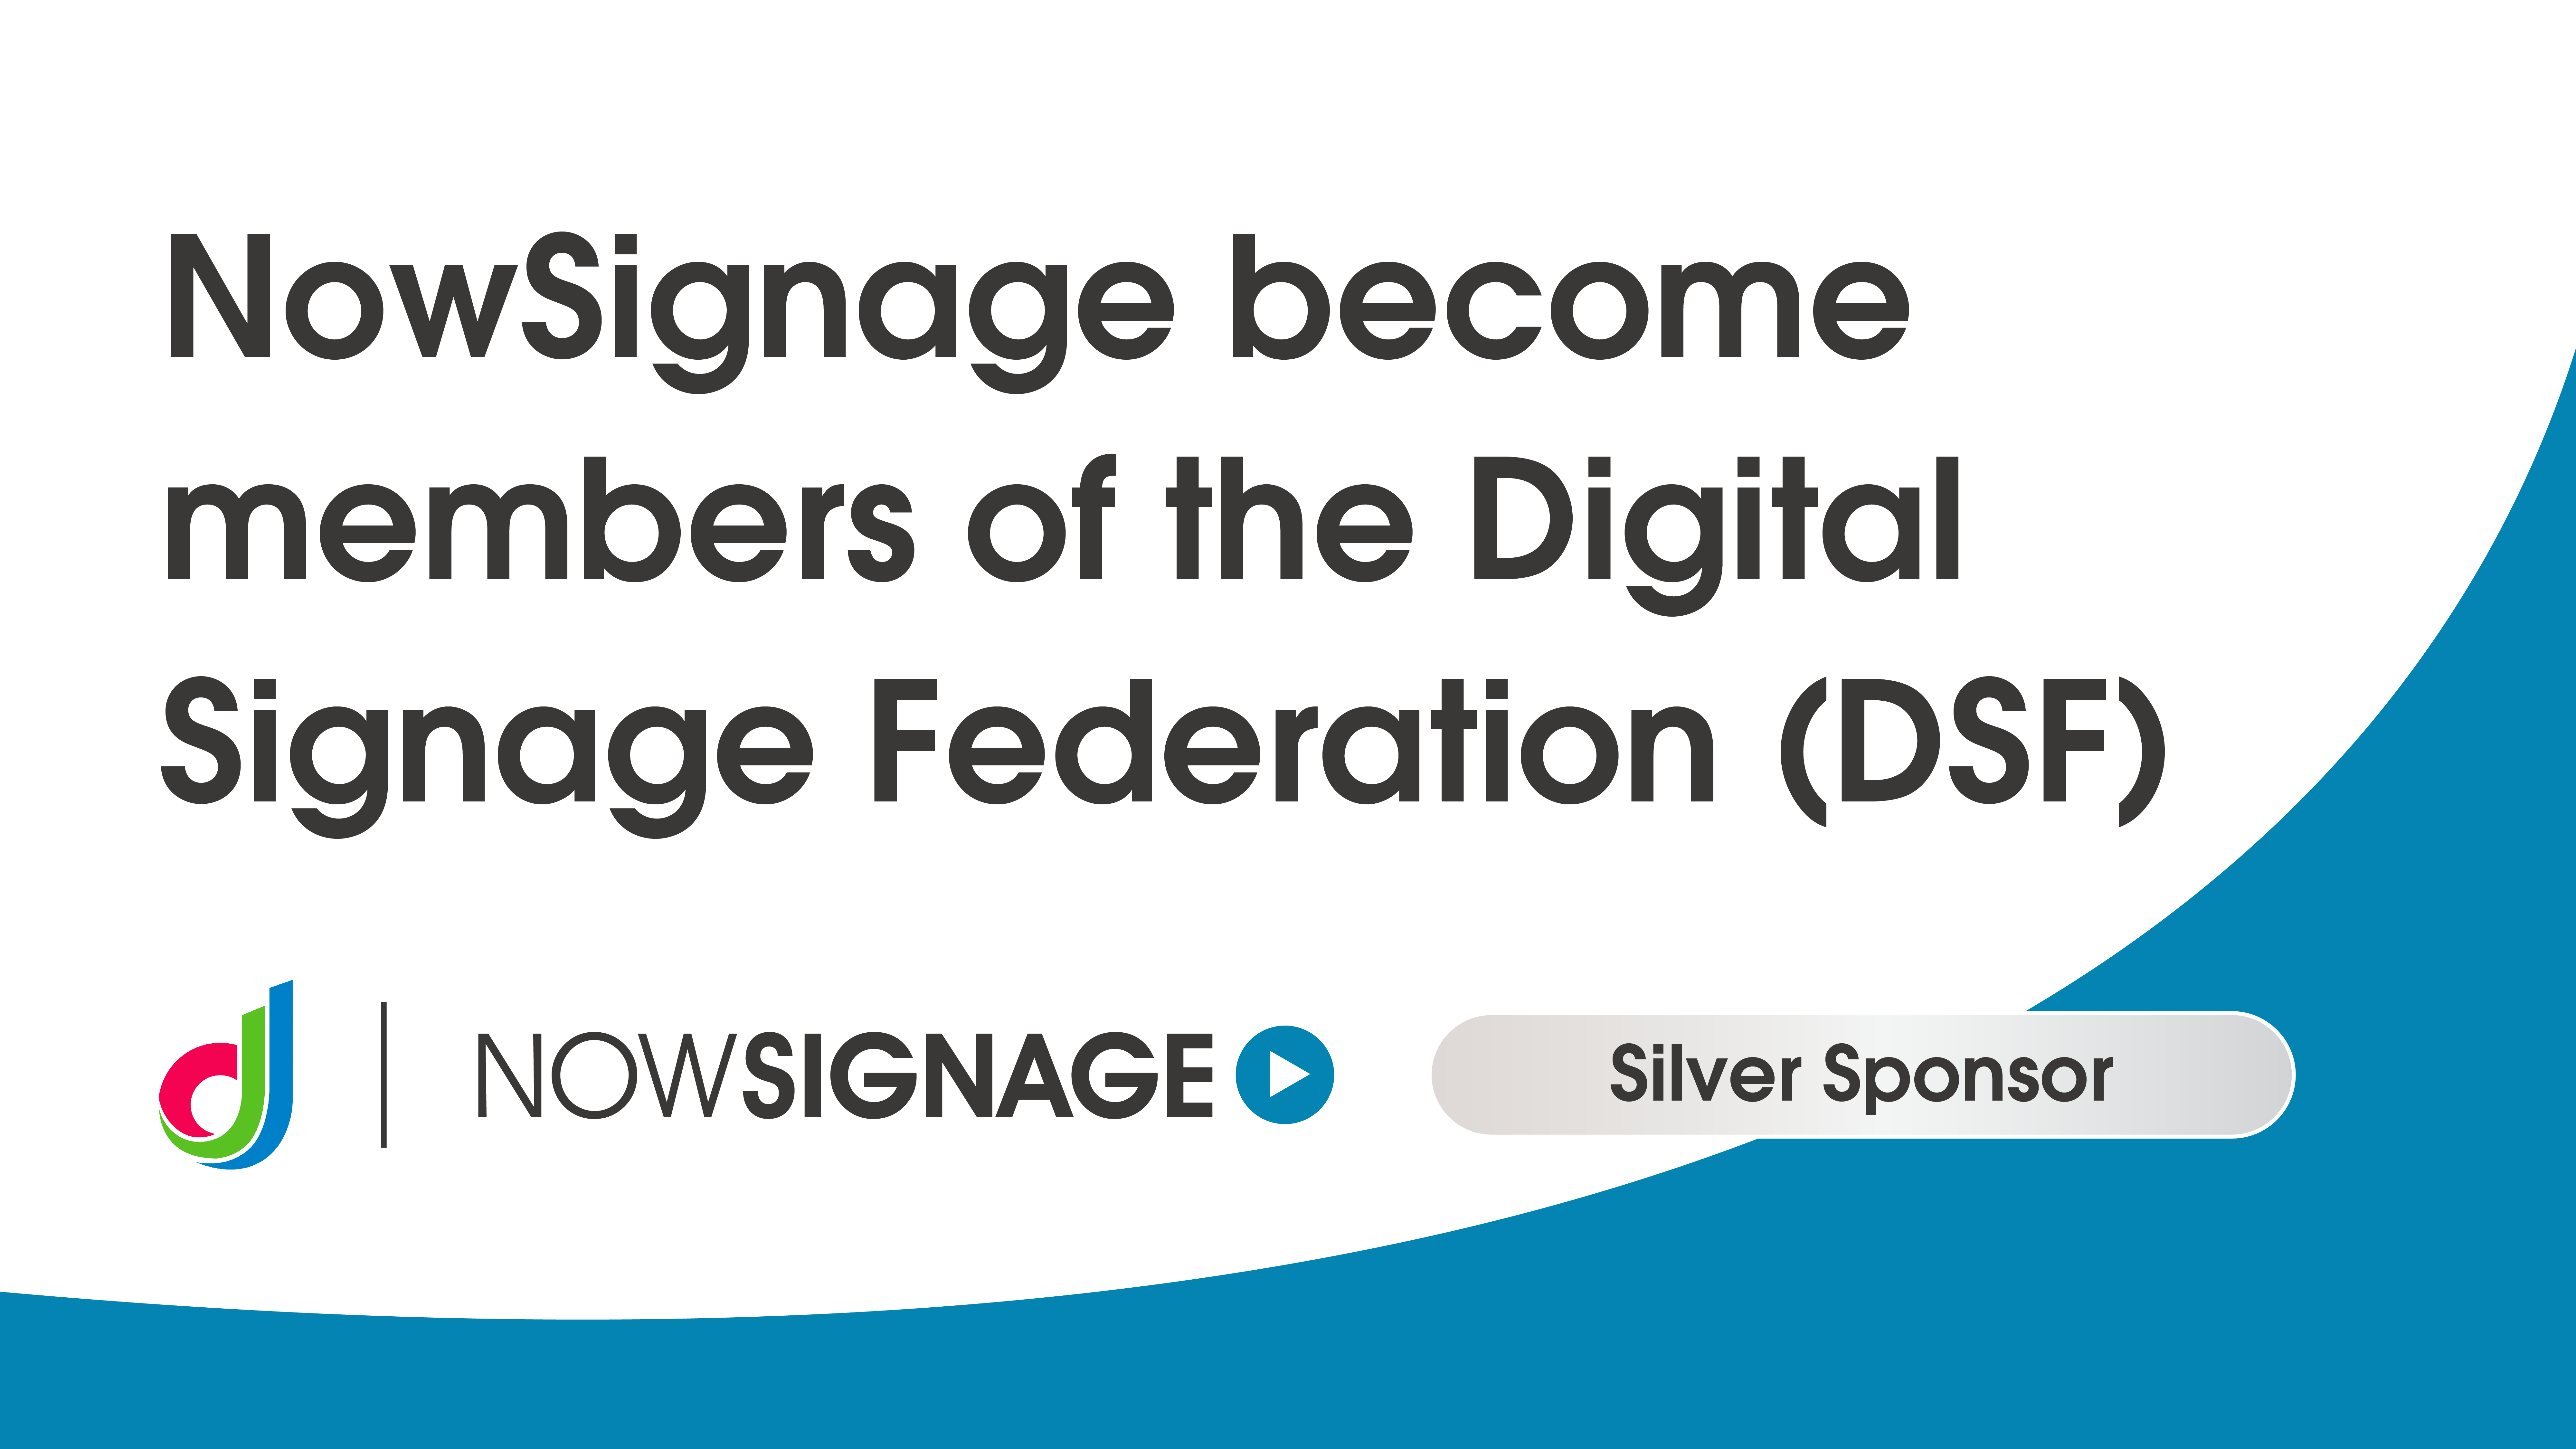 NowSignage become members of the Digital Signage Federation